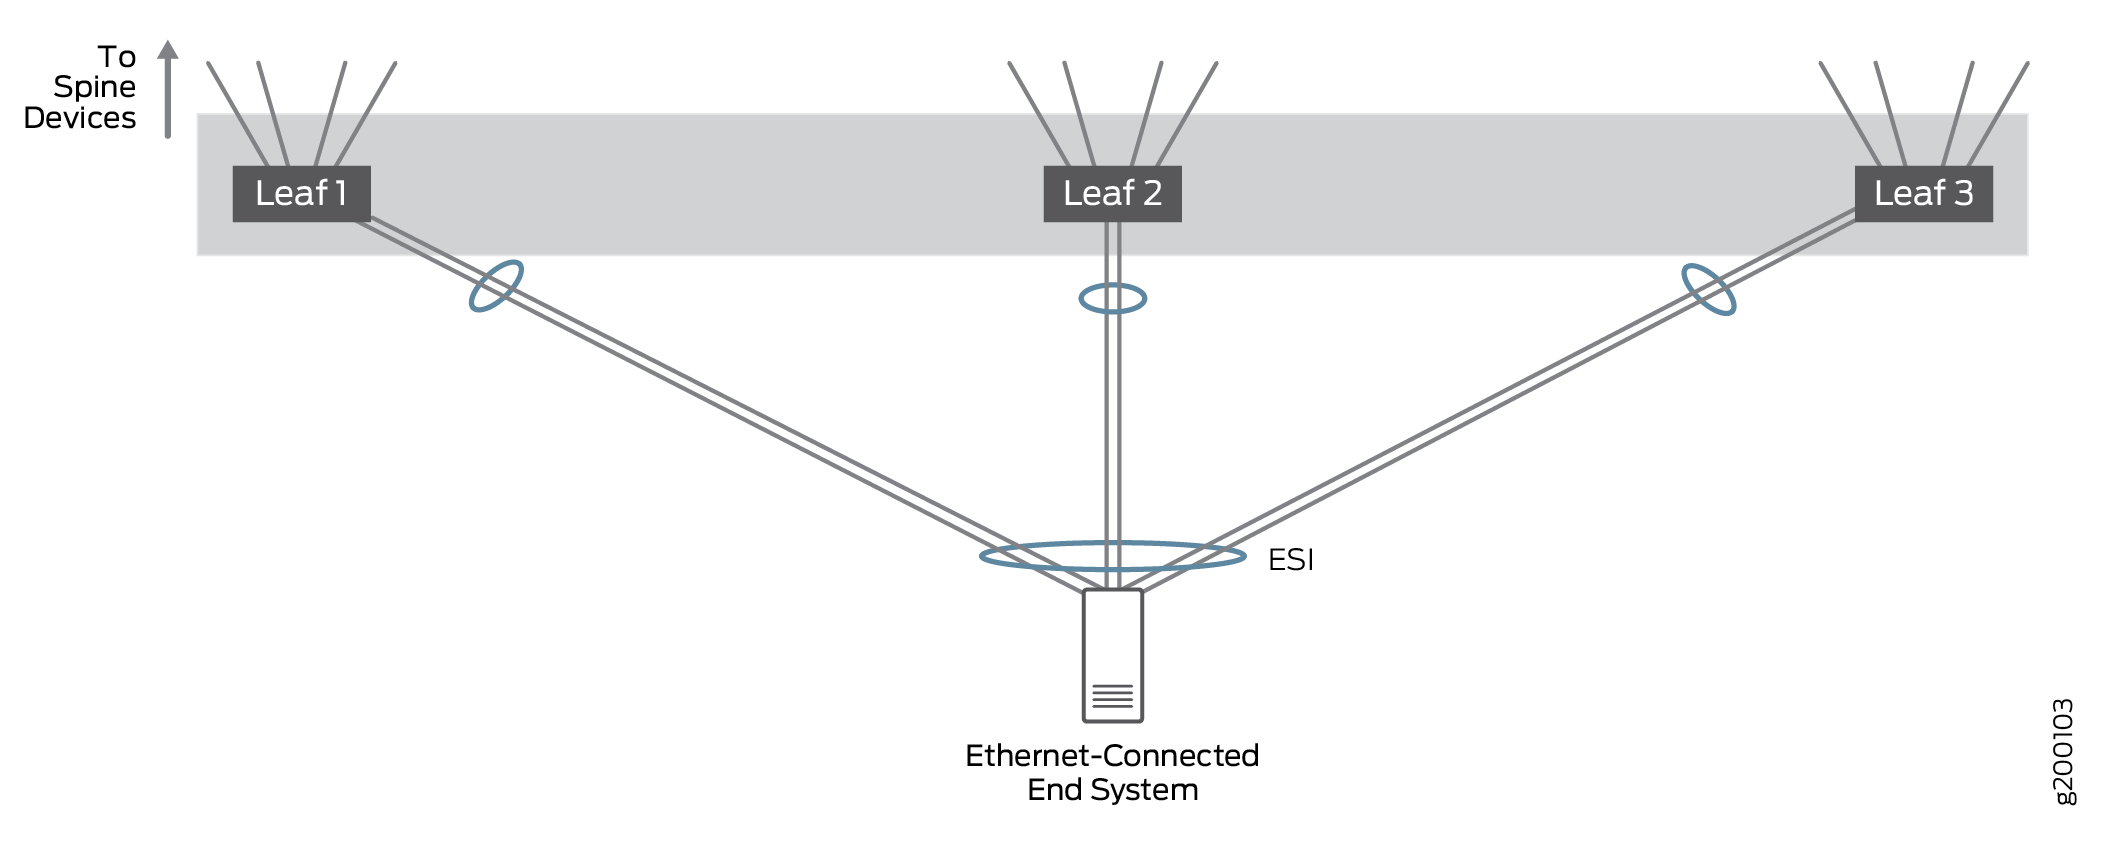 Ethernet-Connected End System Multihoming